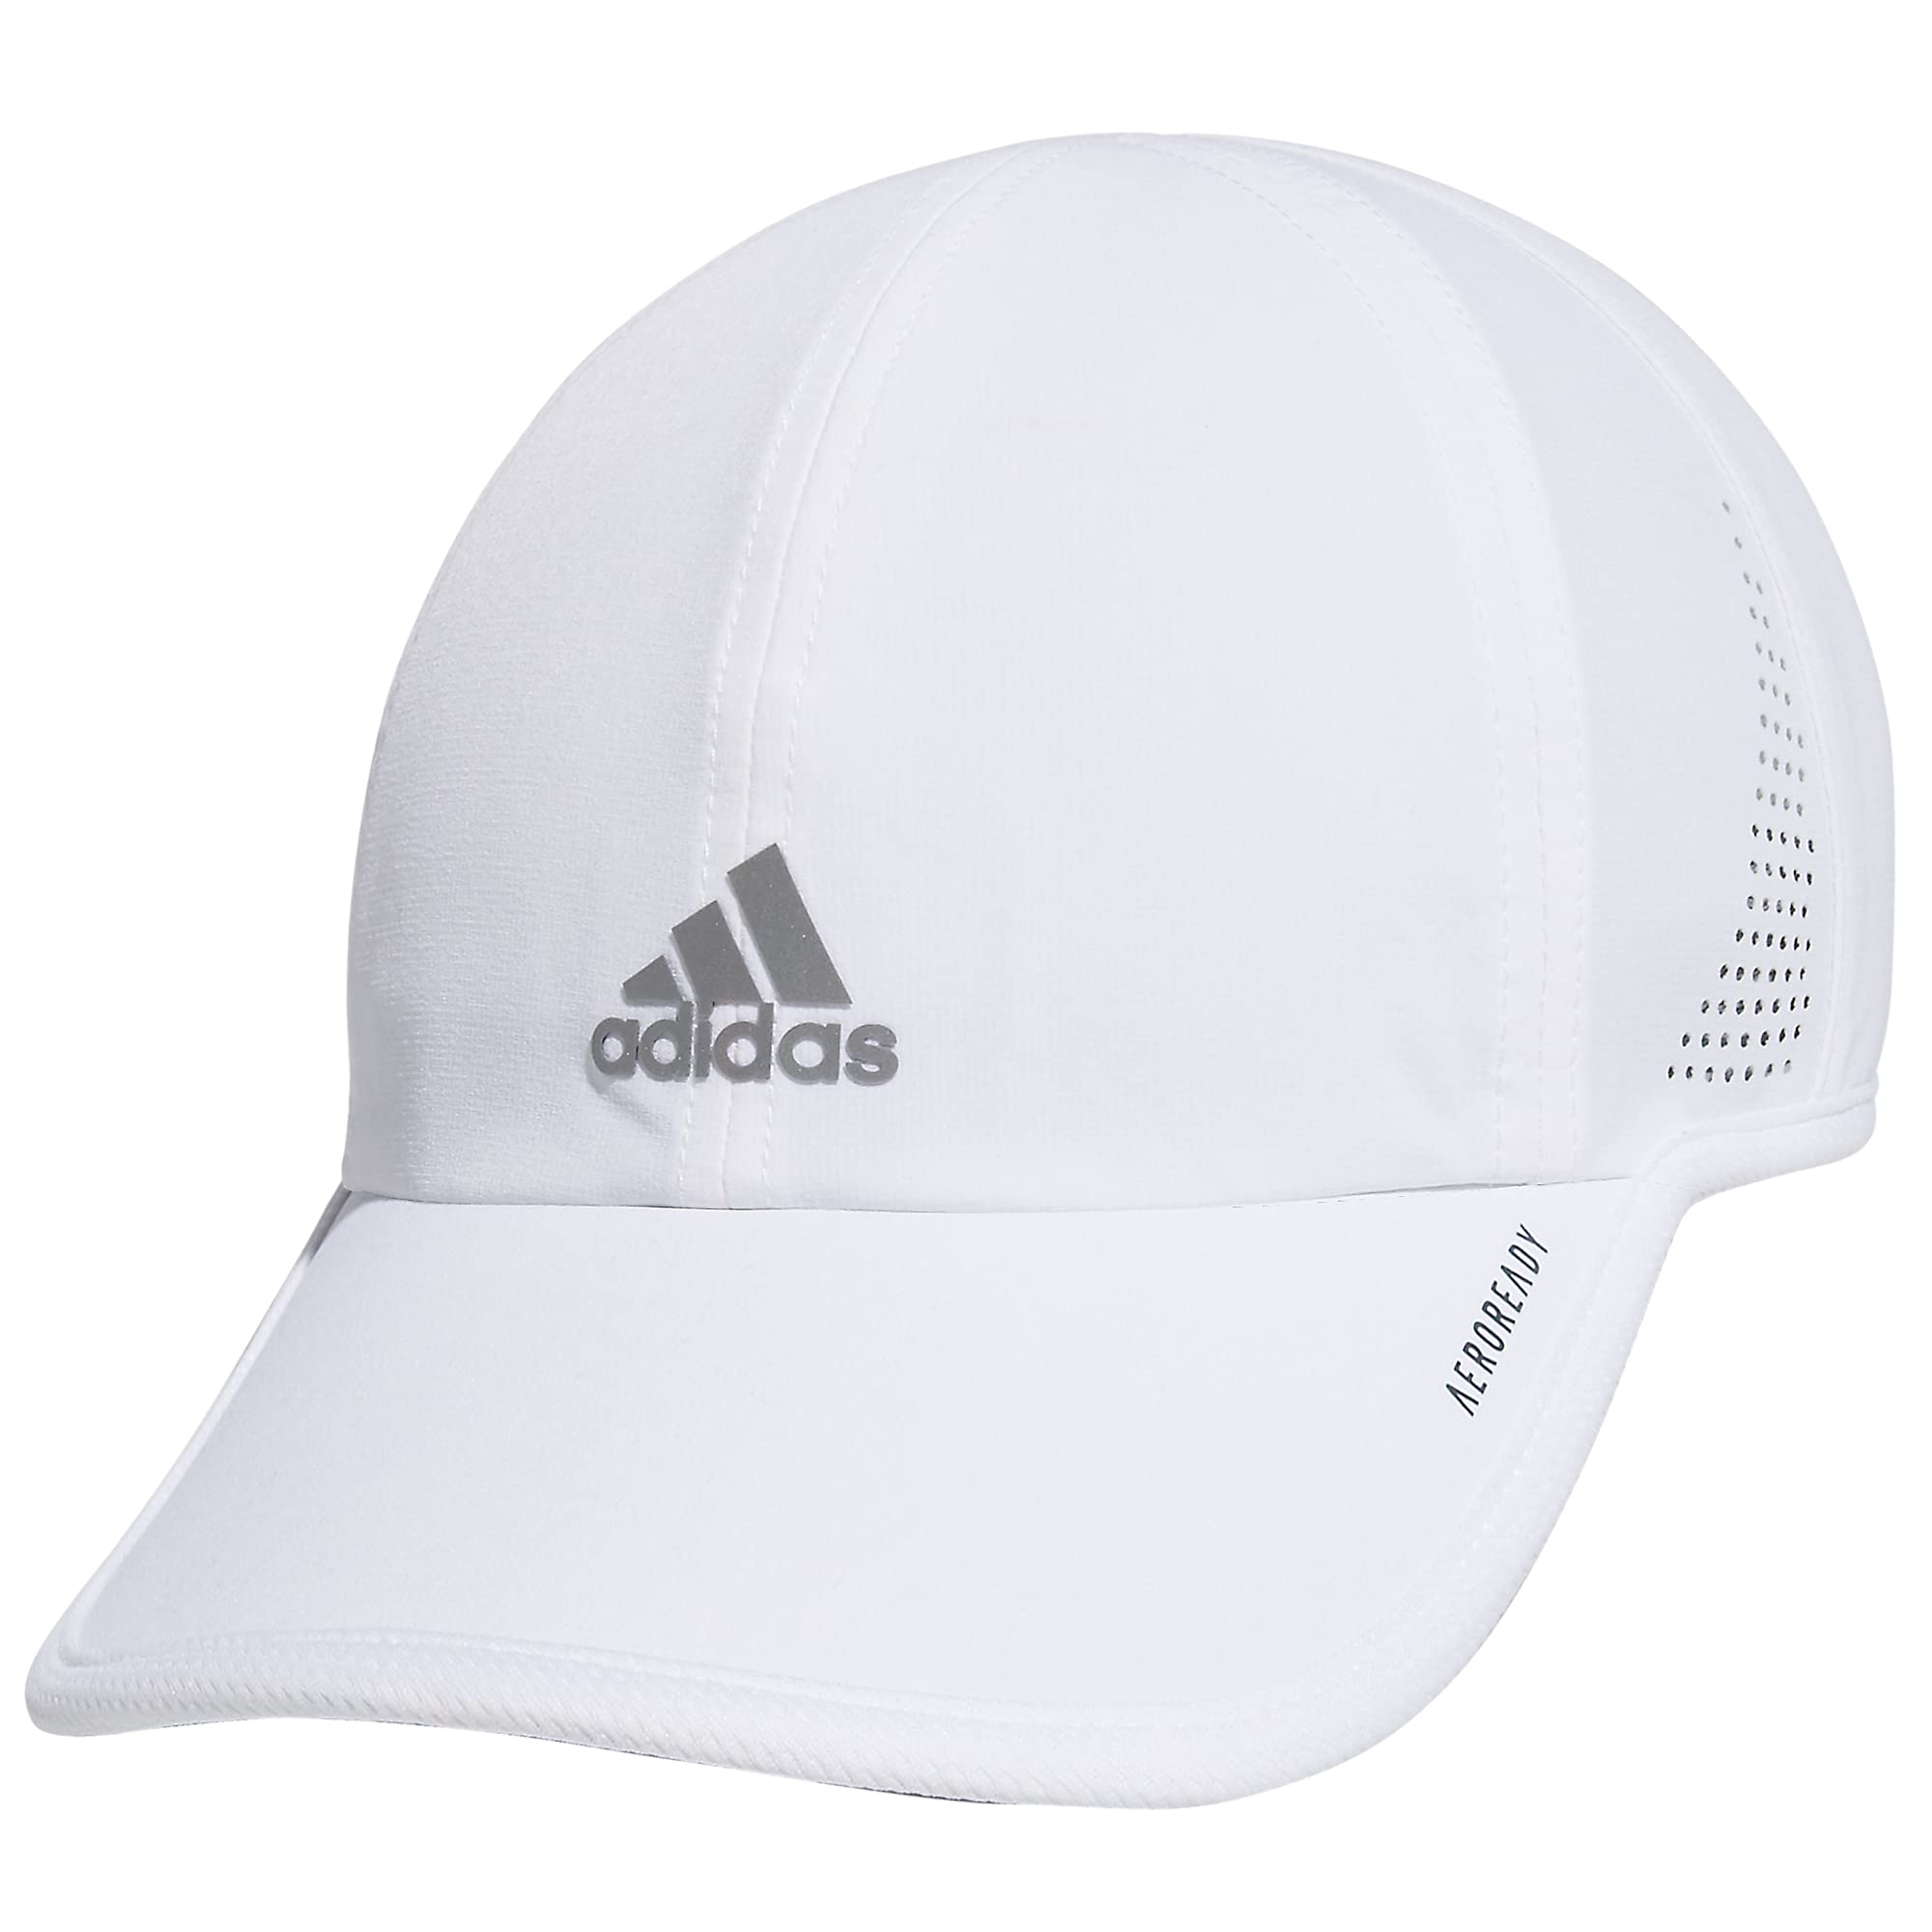 adidas Women's Superlite Relaxed Fit Performance Hat - $13.49 - Amazon